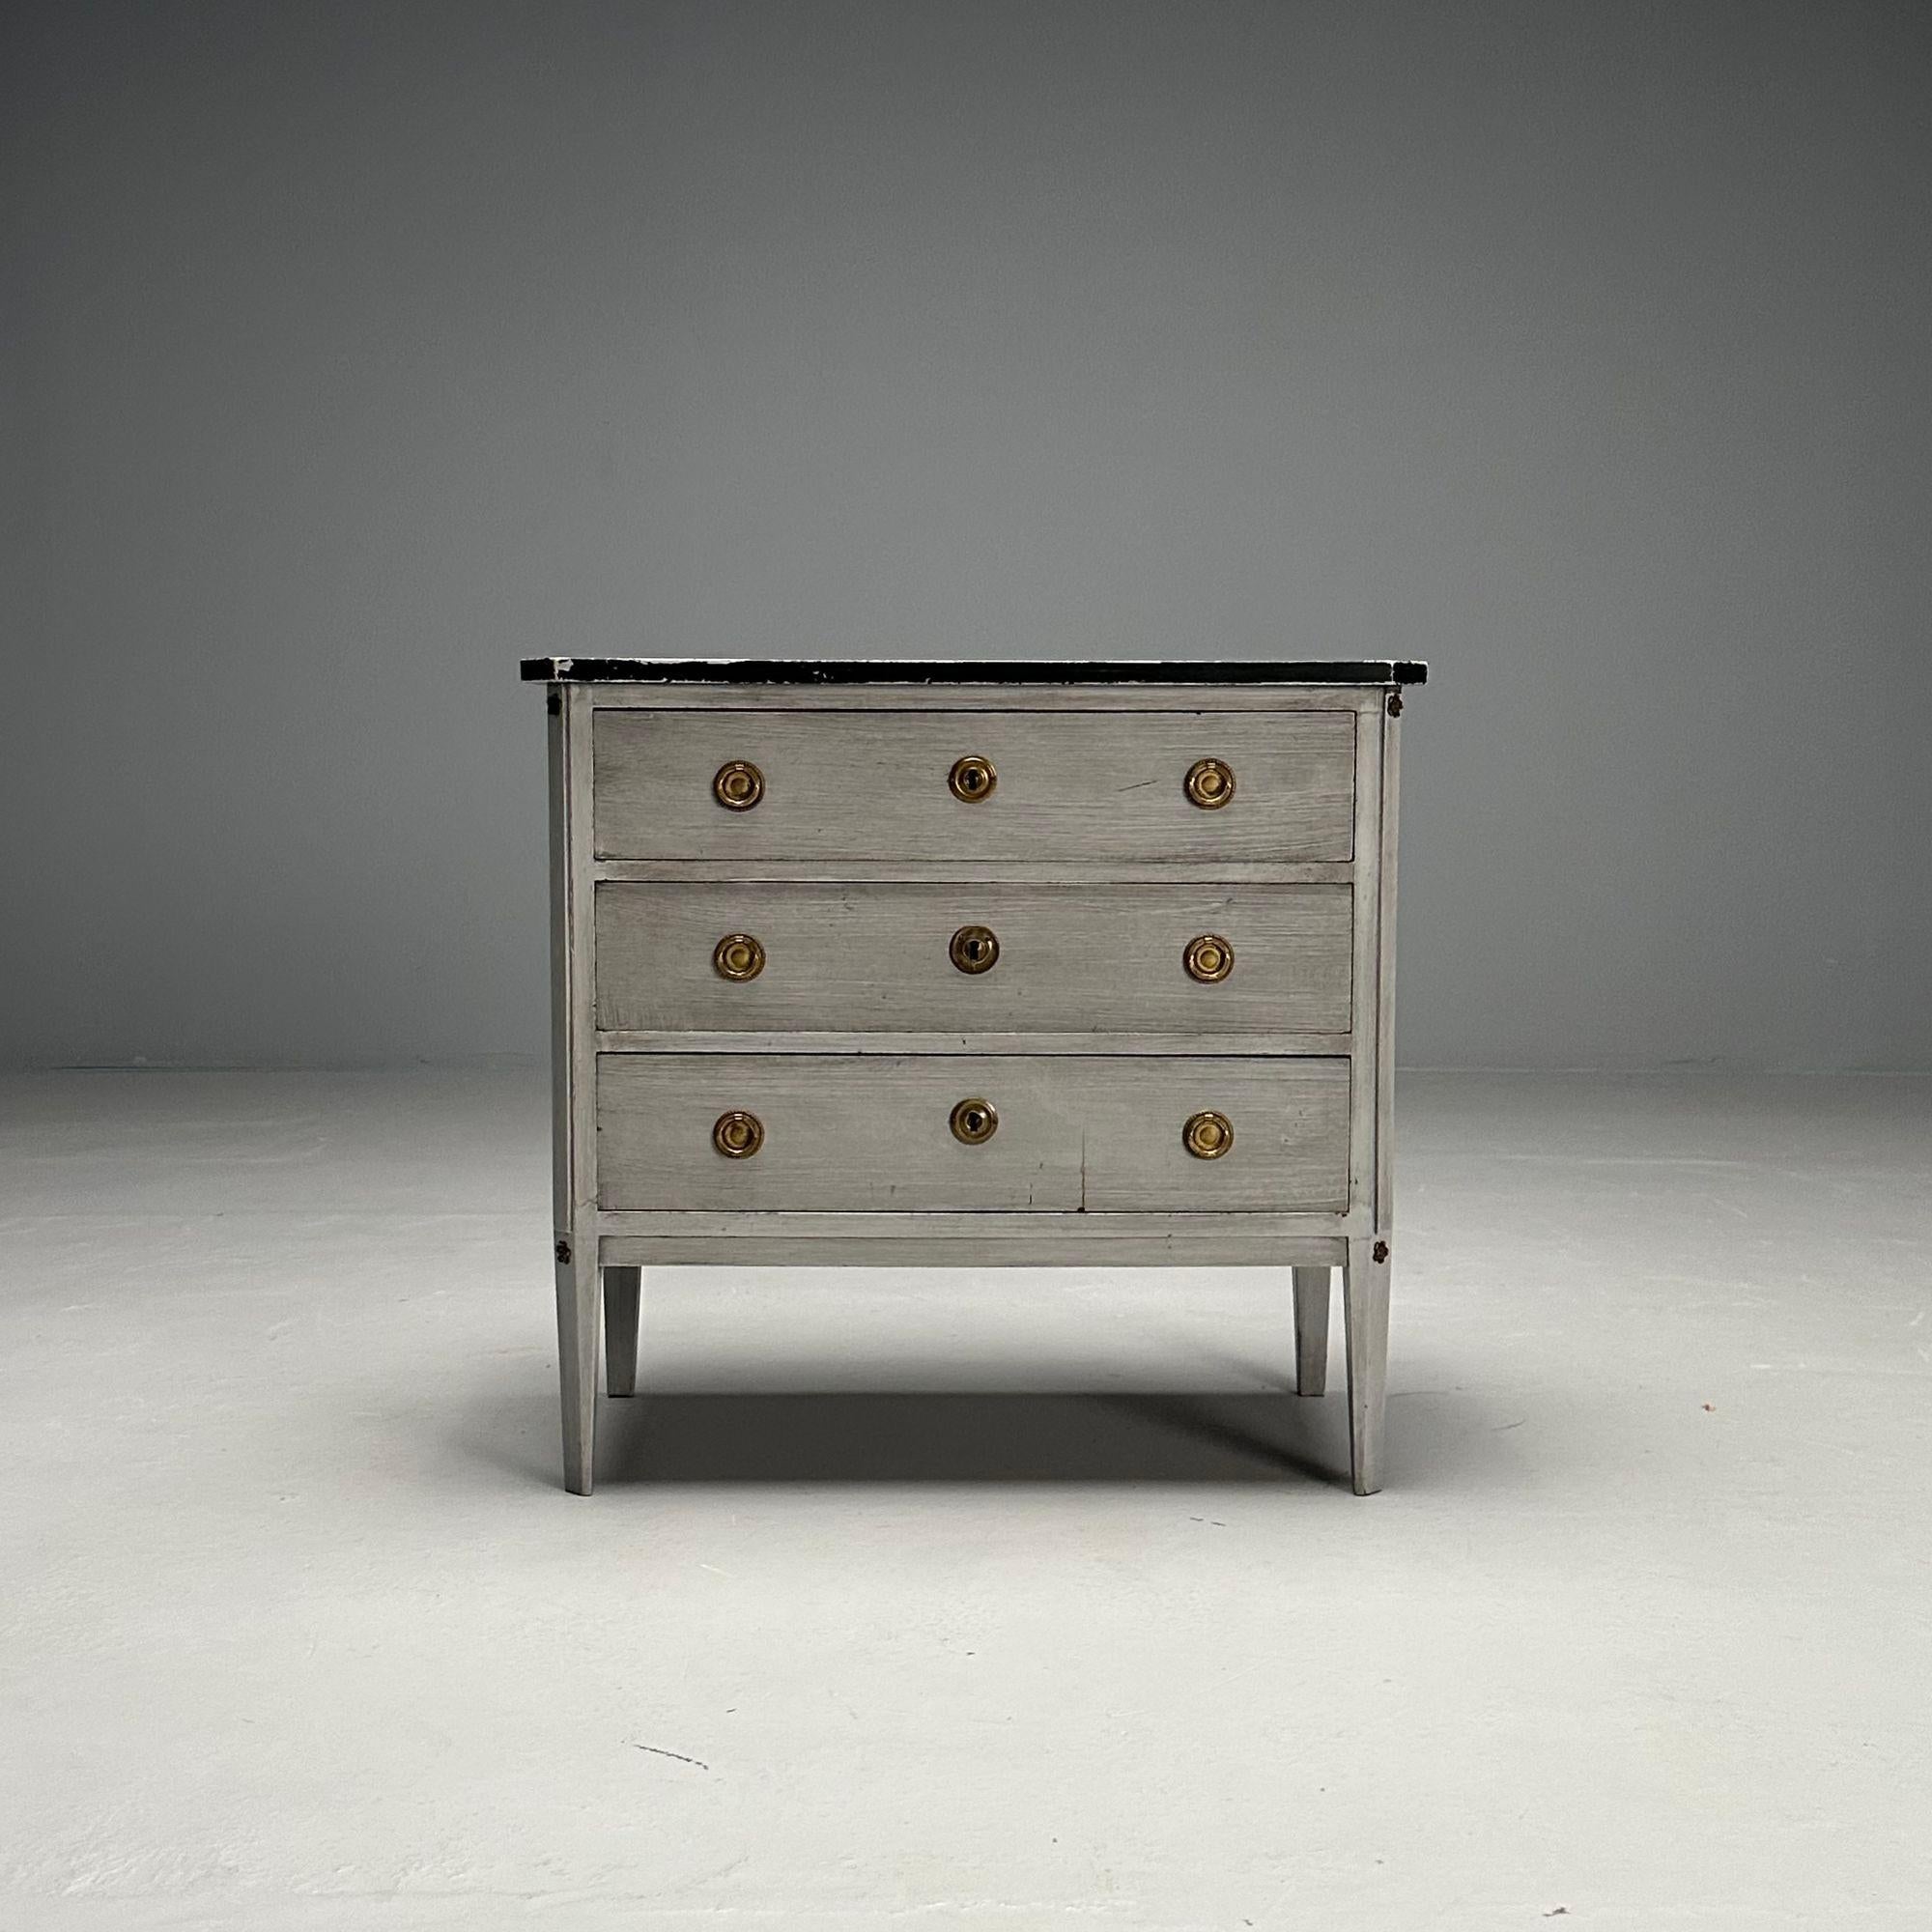 Gustavian, Swedish Commode, Gray Paint Distressed, Sweden, 1950s

Gustavian chest of drawers with a gray paint distressed finish designed and produced in Sweden circa 1950s. This example features a black painted imitation stone top and three